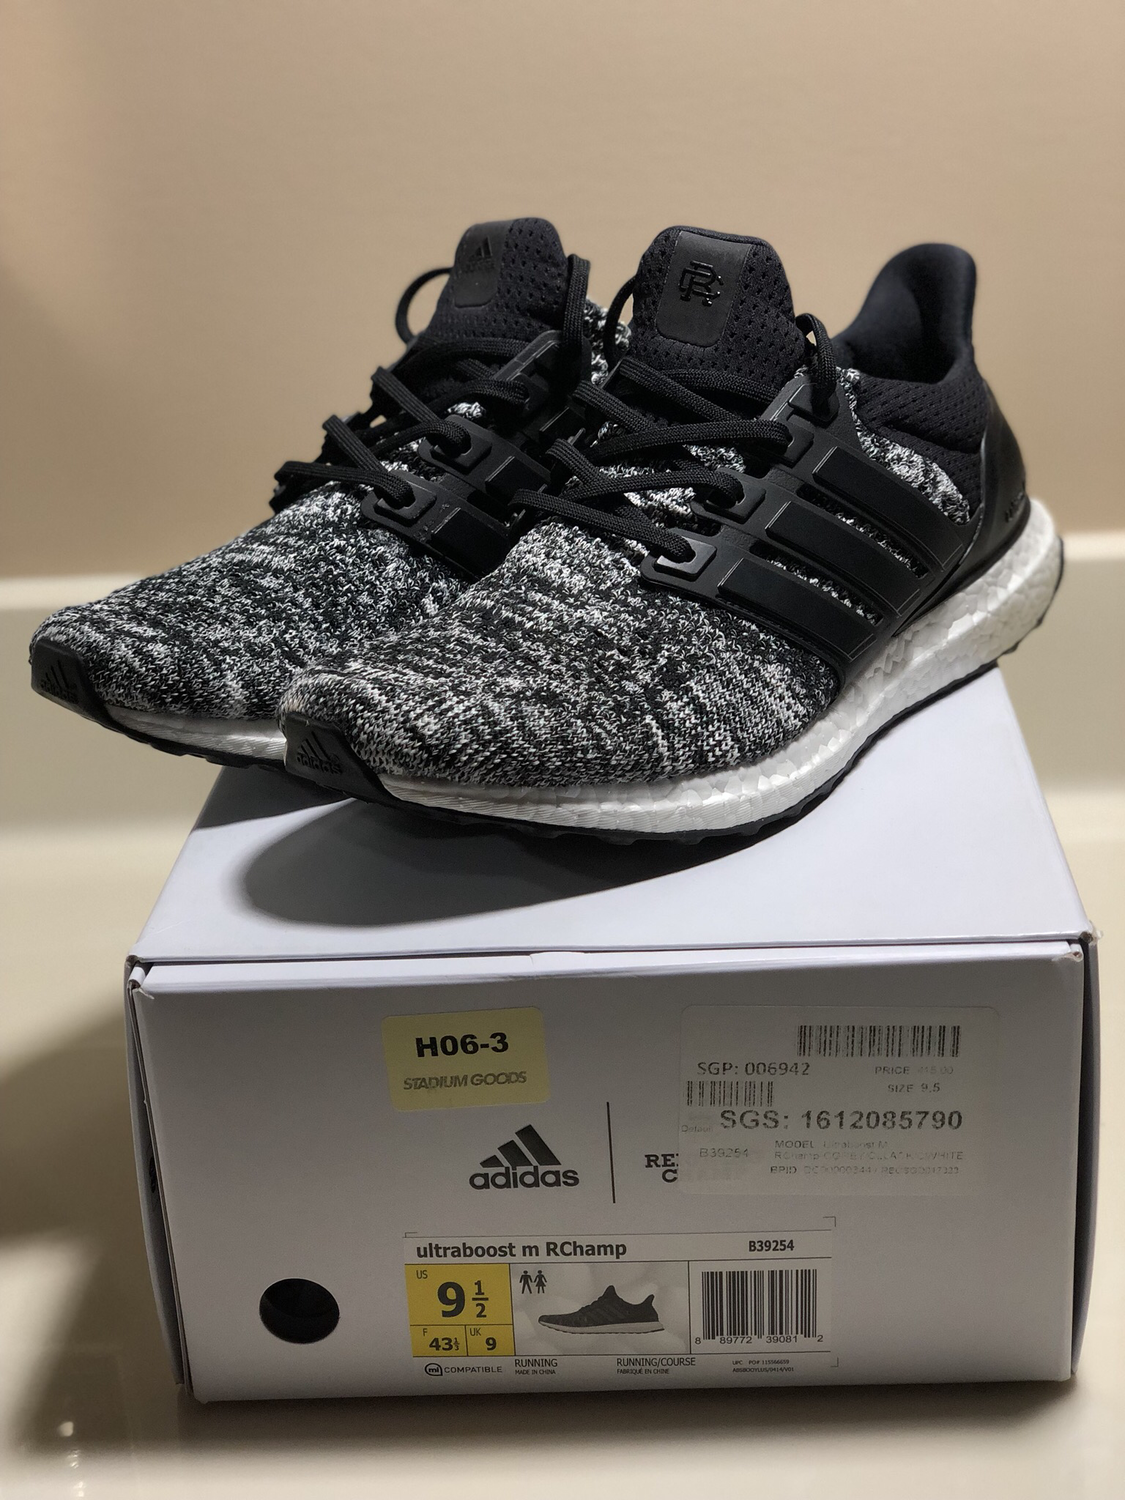 reigning champ 1.0